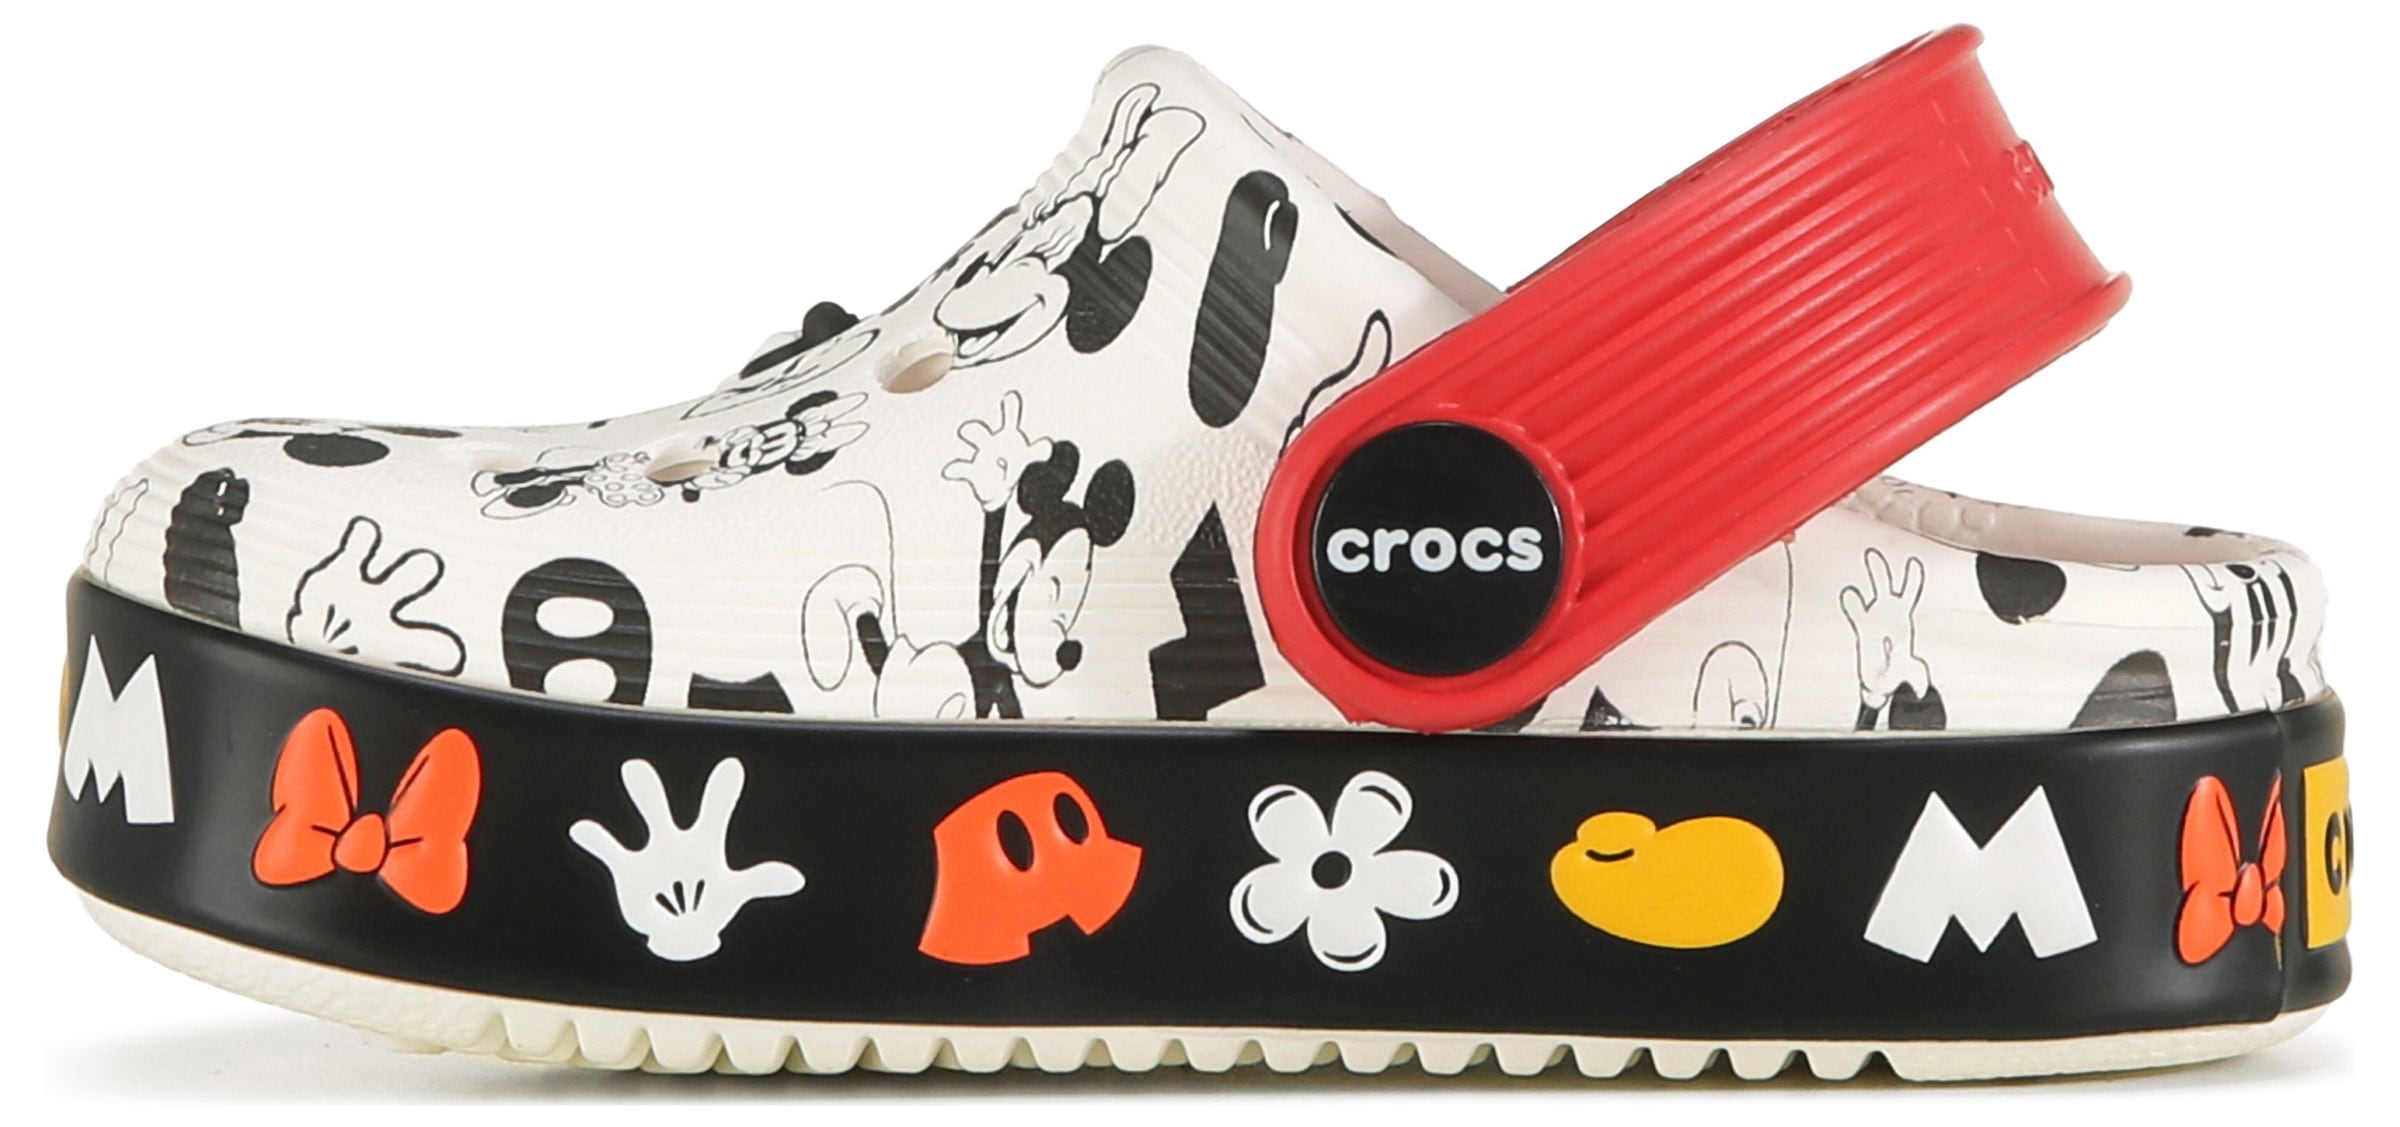 Put Your Best Foot Forward in New Mickey and Minnie Crocs! 